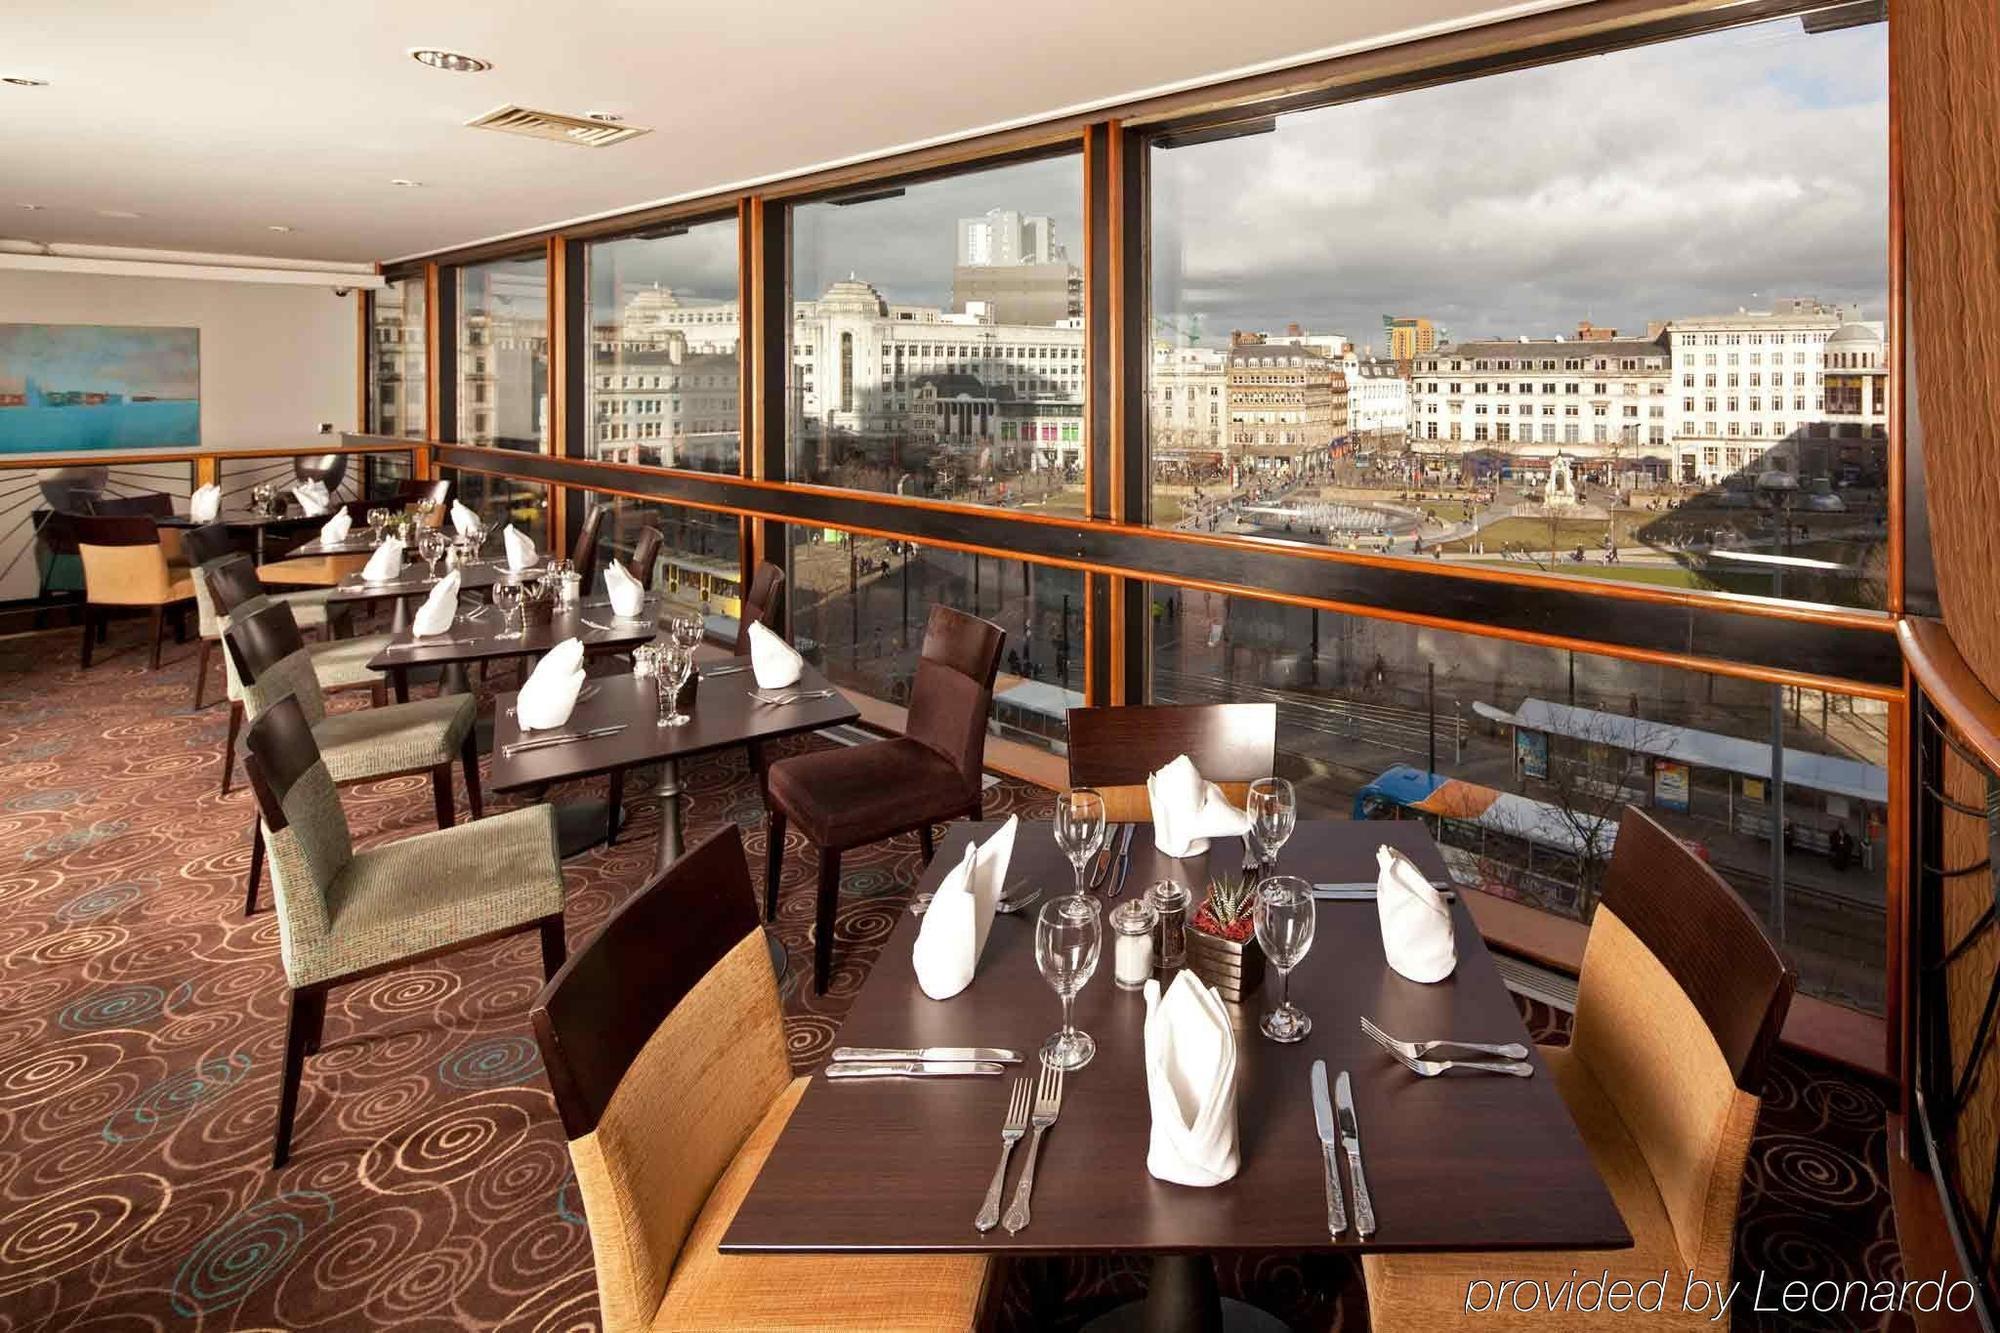 Mercure Manchester Piccadilly Hotel Restaurant photo